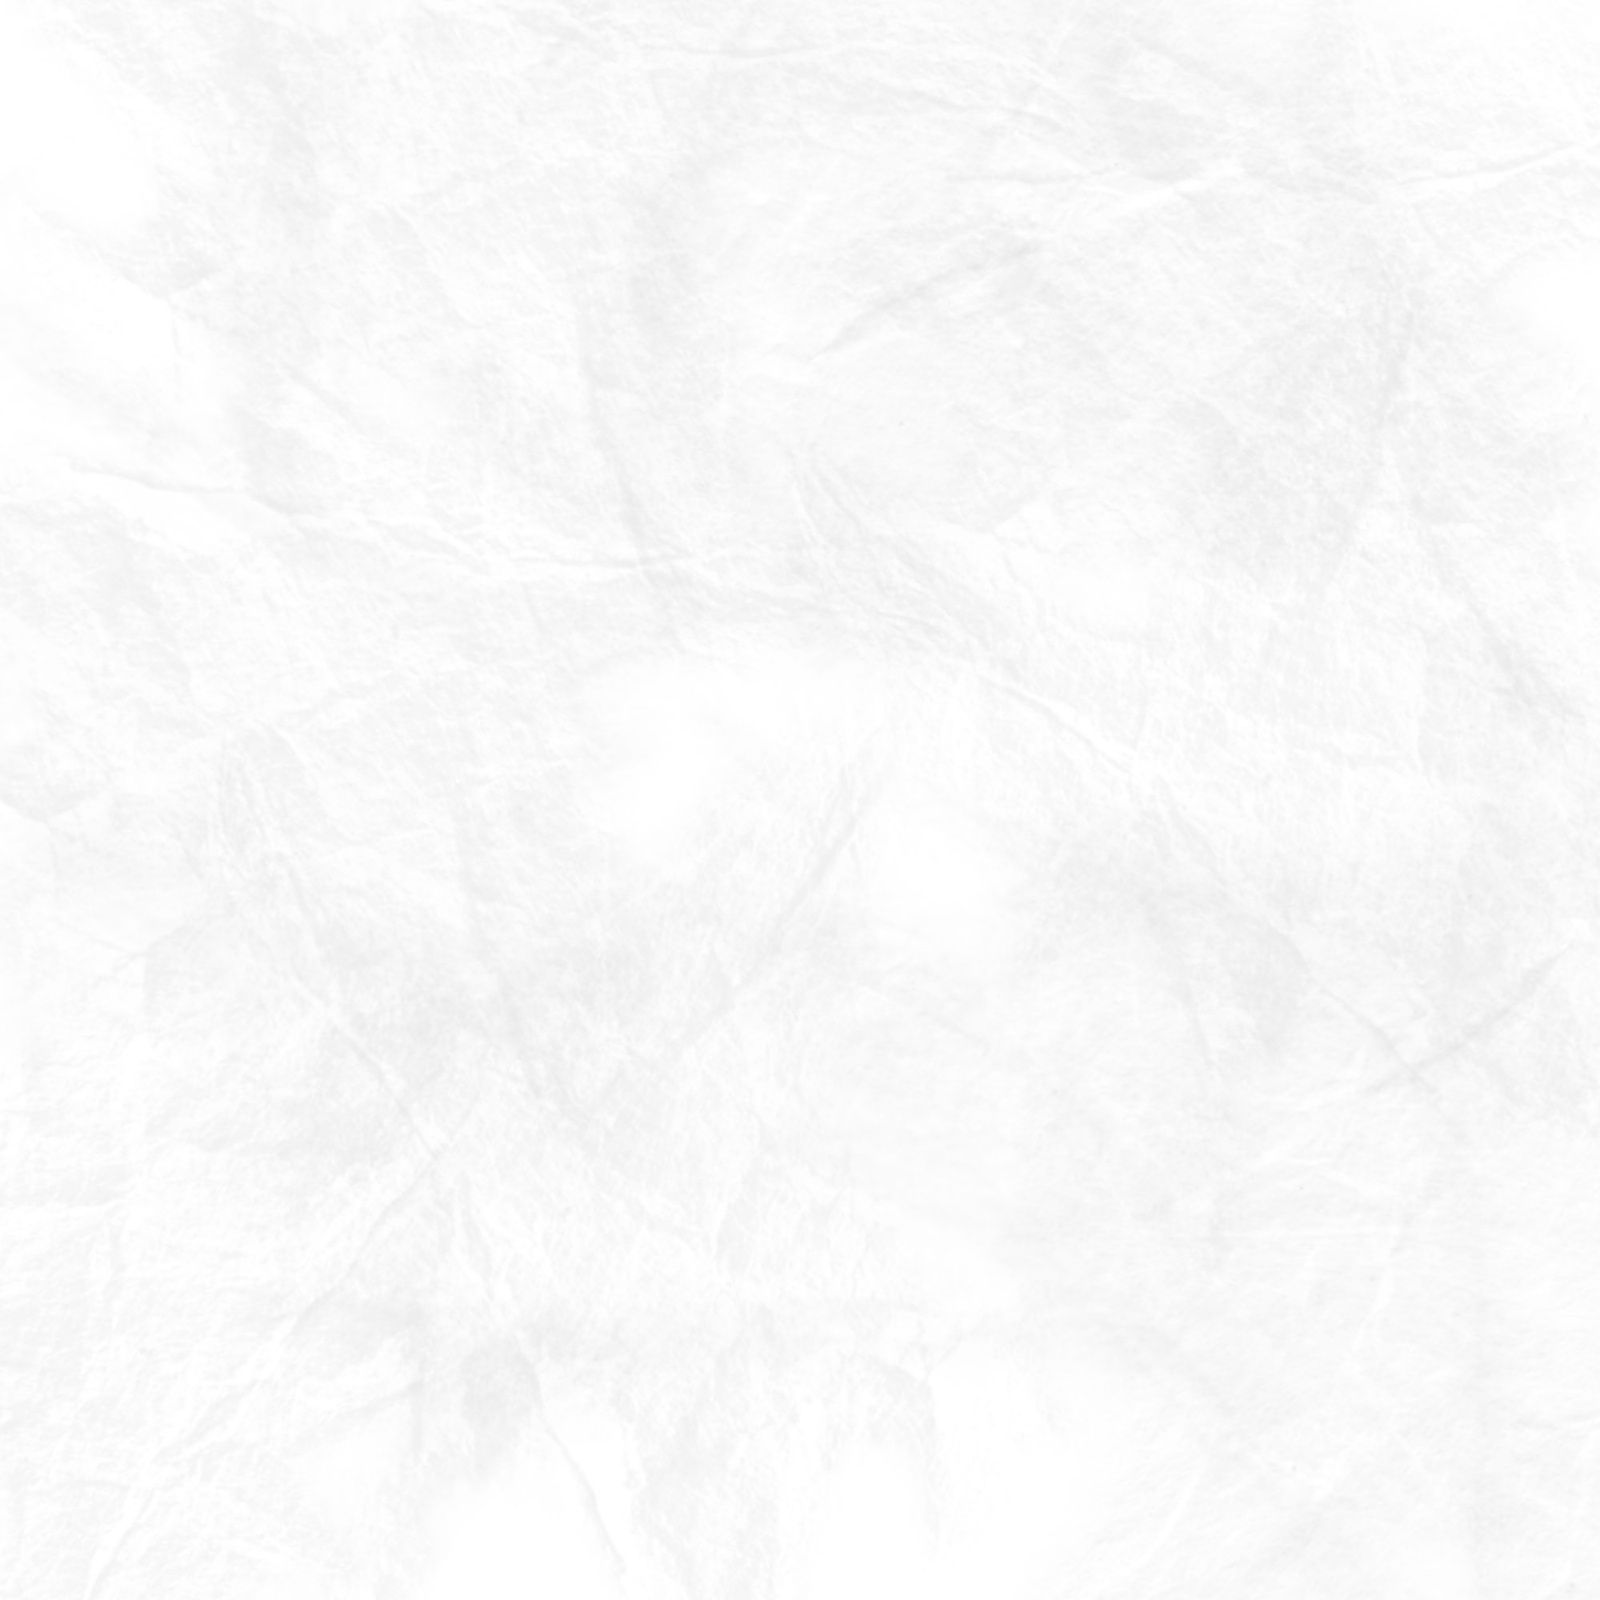 Wrinkled white paper texture background